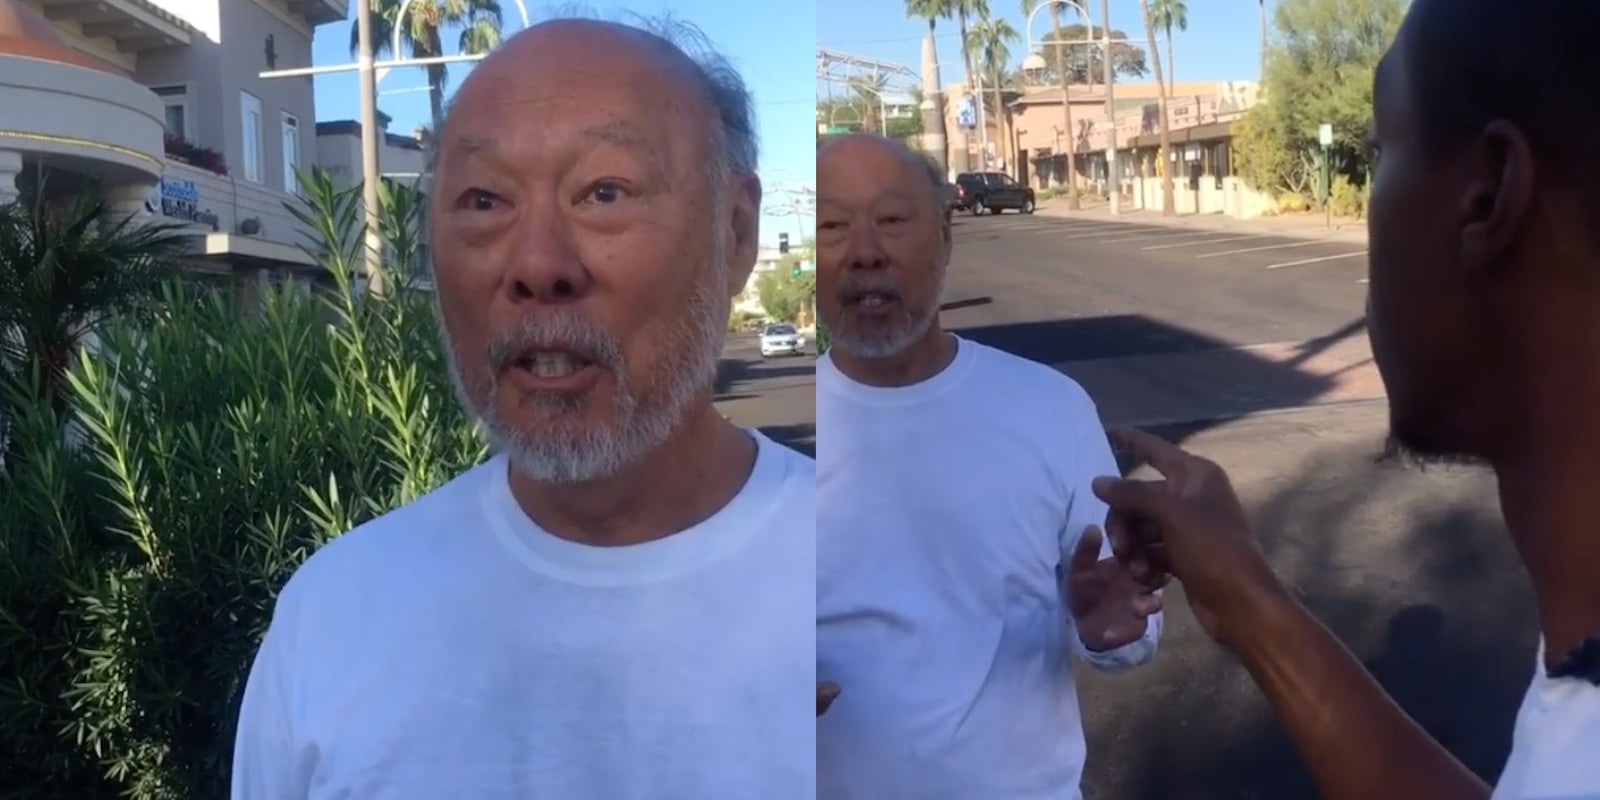 Paul Ng told a Black man that his living location is a no-[N-word] zone